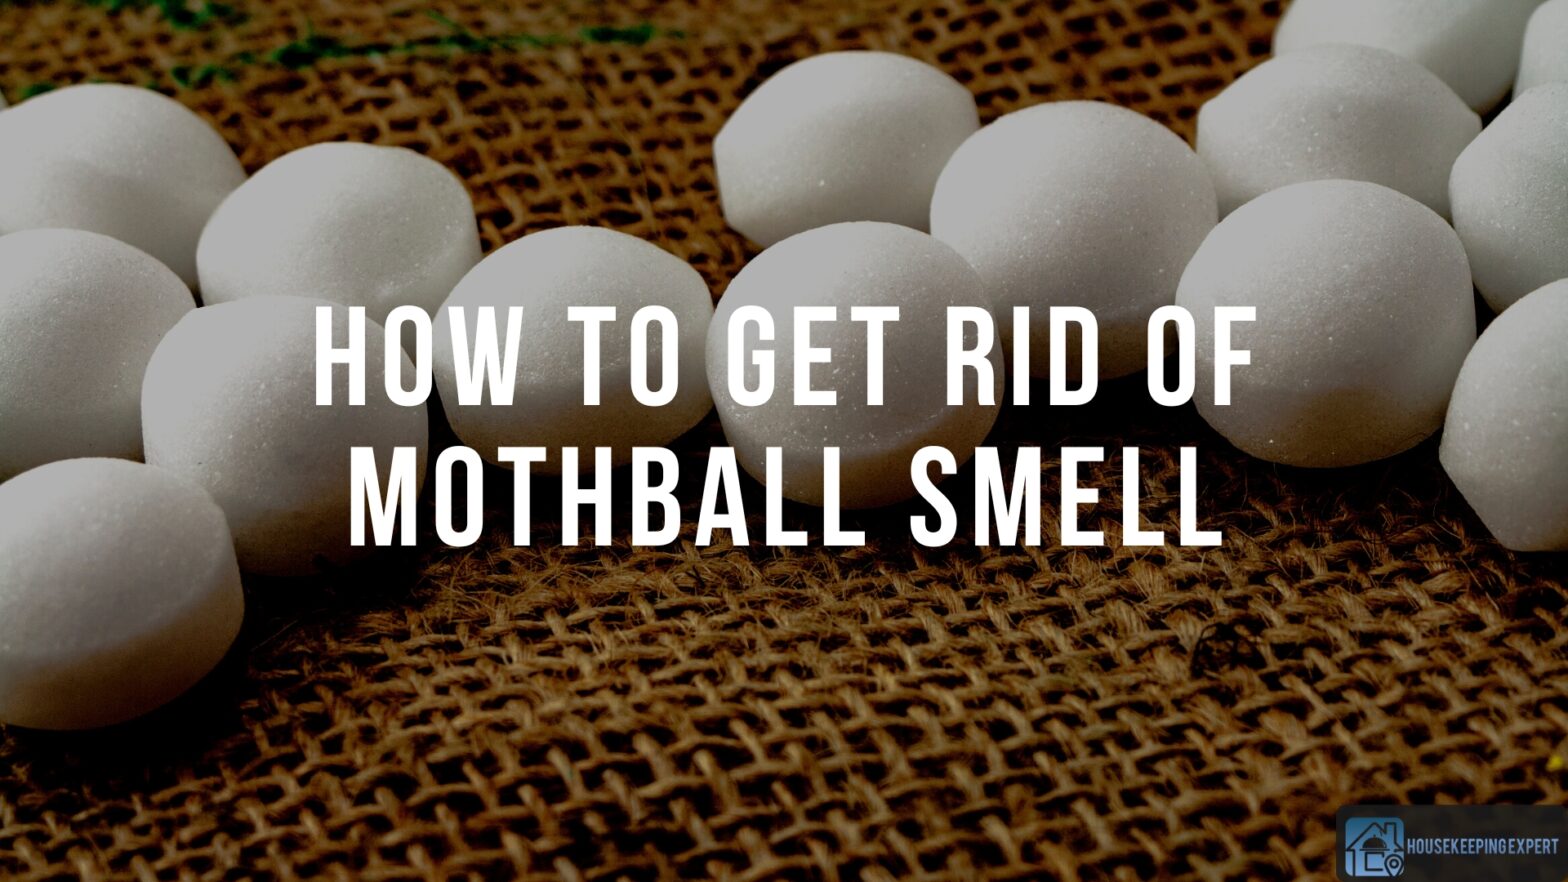 How To Get Rid Of Mothball Smell